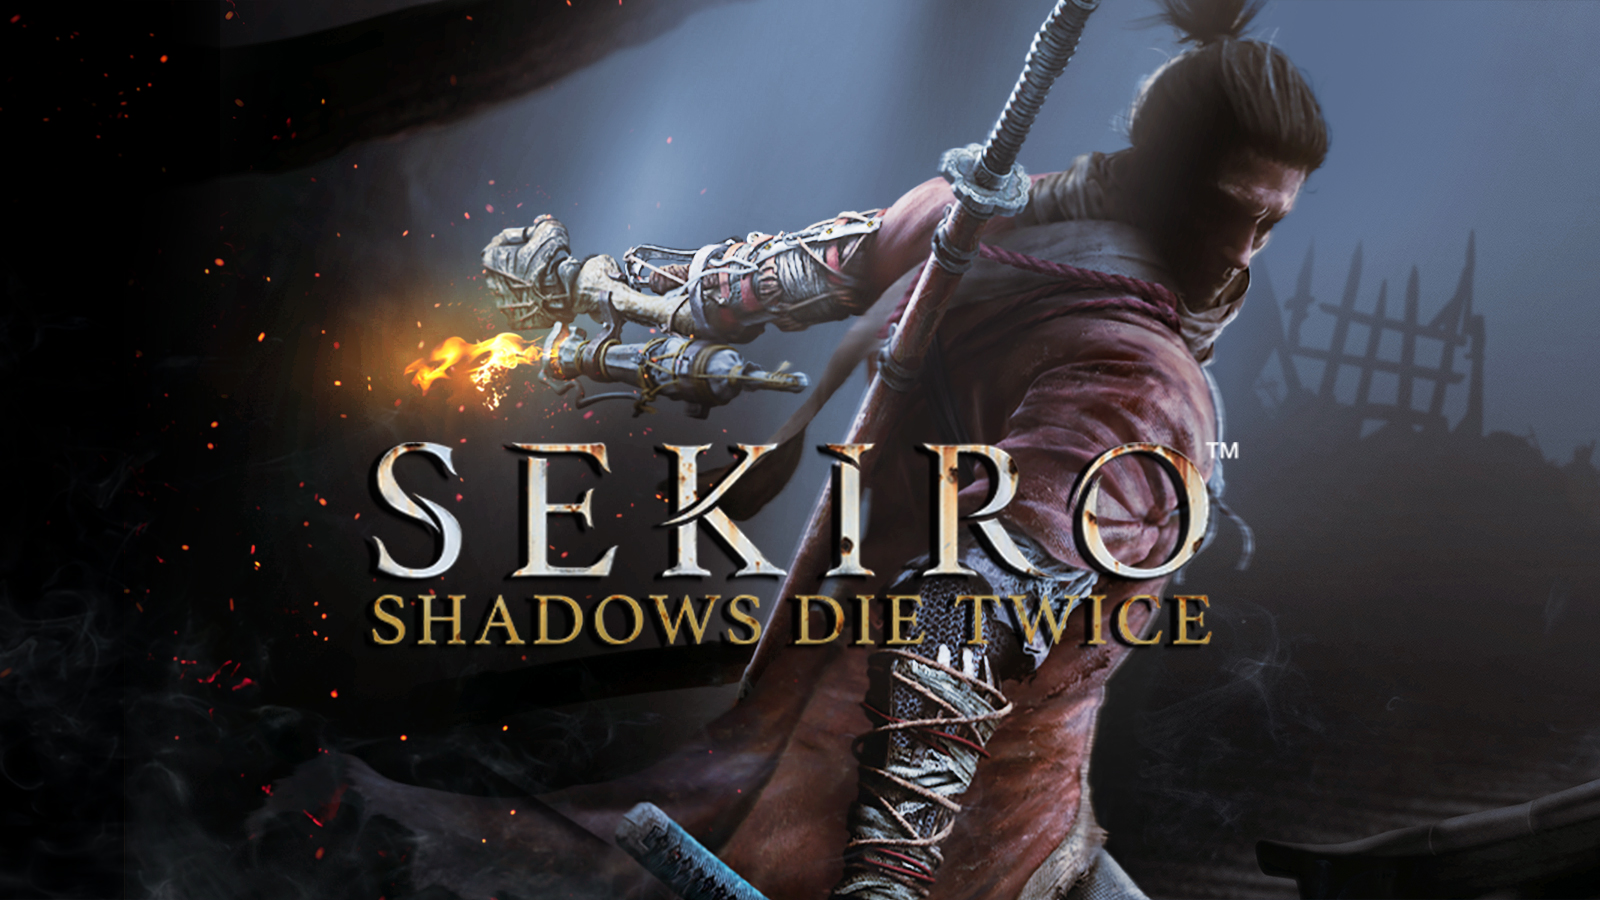 sekiro-shadows-die-twice-launches-worldwide-on-march-22nd-2019-the-koalition